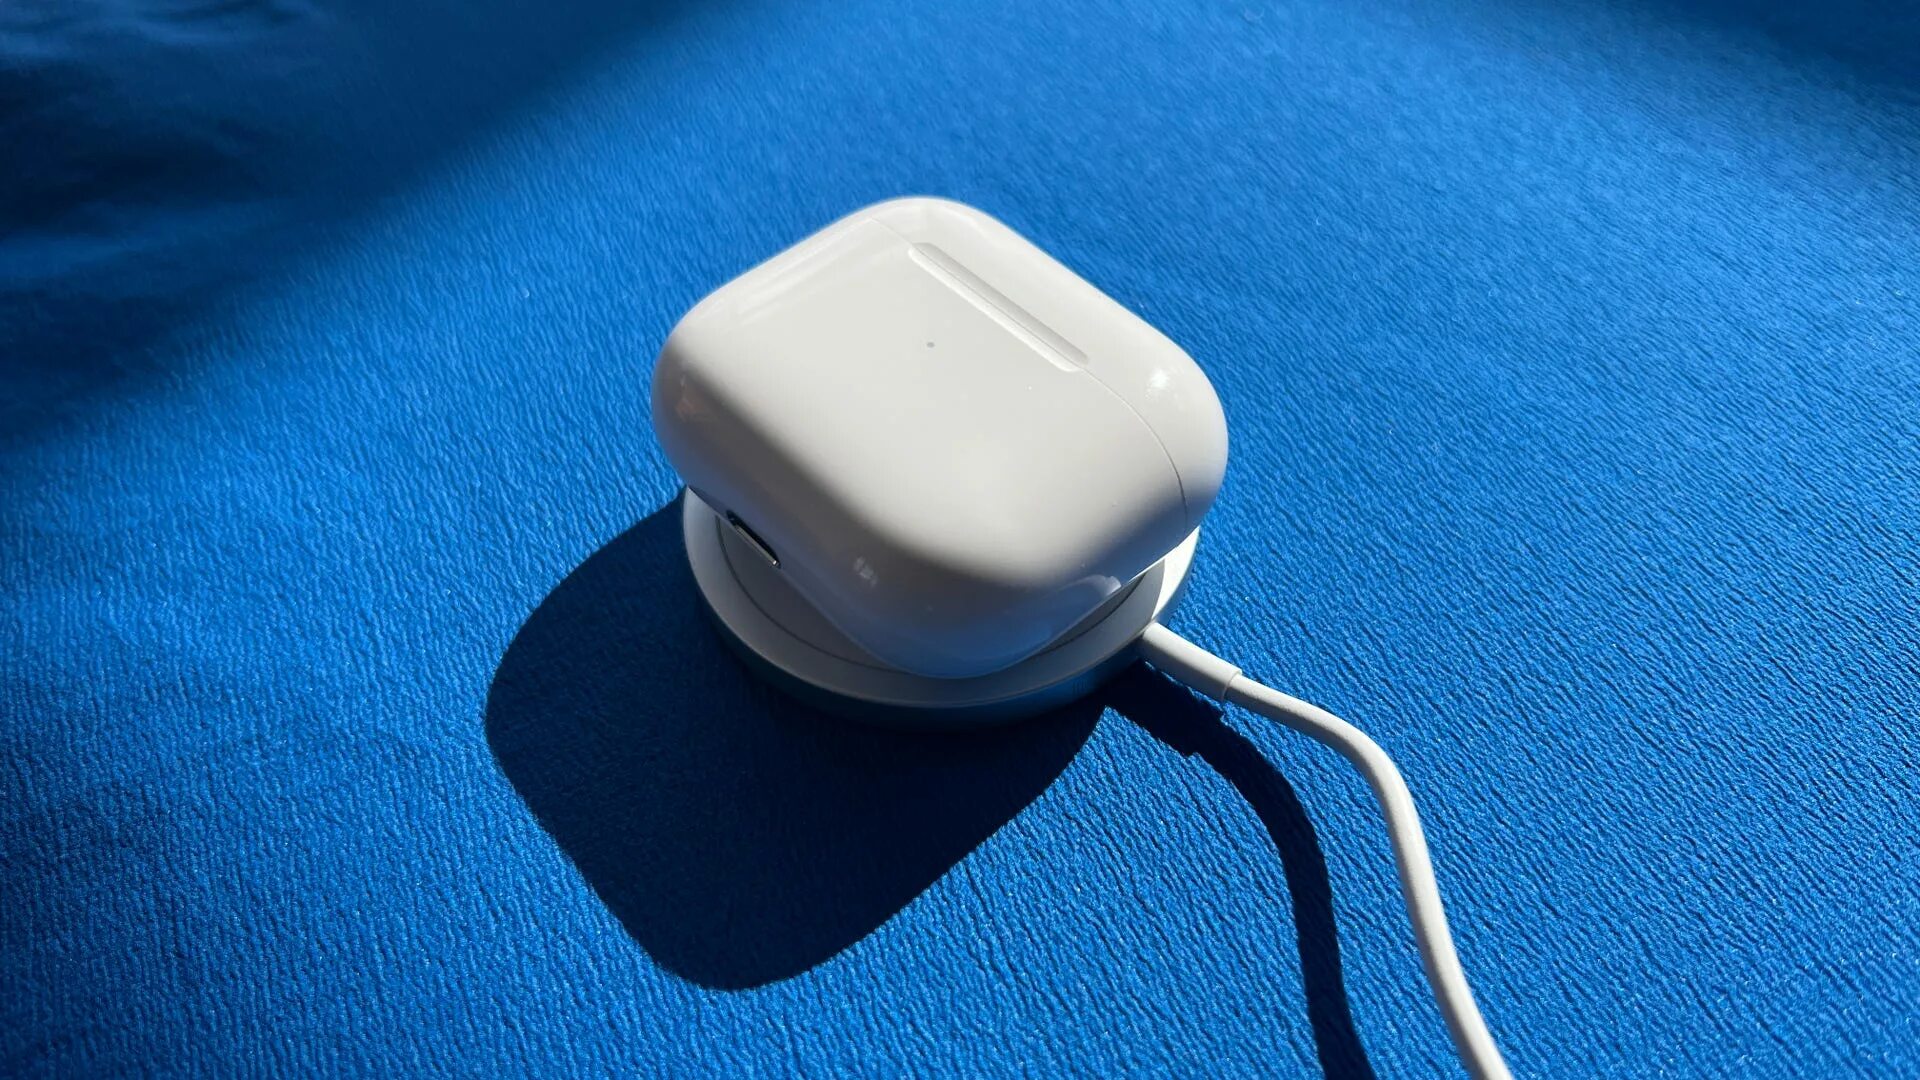 Apple AIRPODS Pro 2 MAGSAFE. Apple AIRPODS Pro MAGSAFE 2021. AIRPODS 3 Pro MAGSAFE. Air pods 3 MAGSAFE. Кейс наушники airpods 3